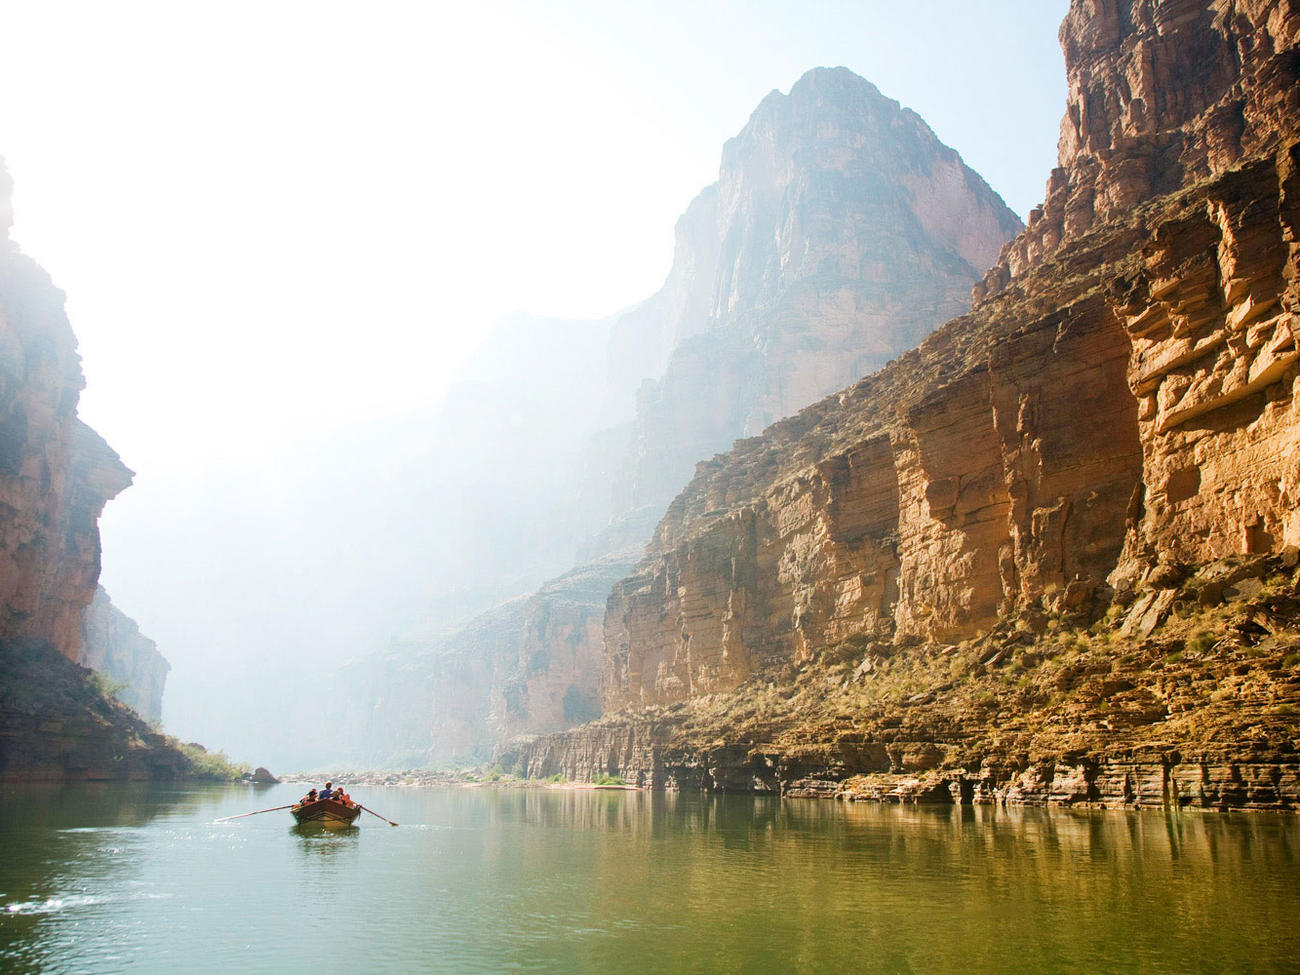 Rafting down the Colorado River in Grand Canyon National Park